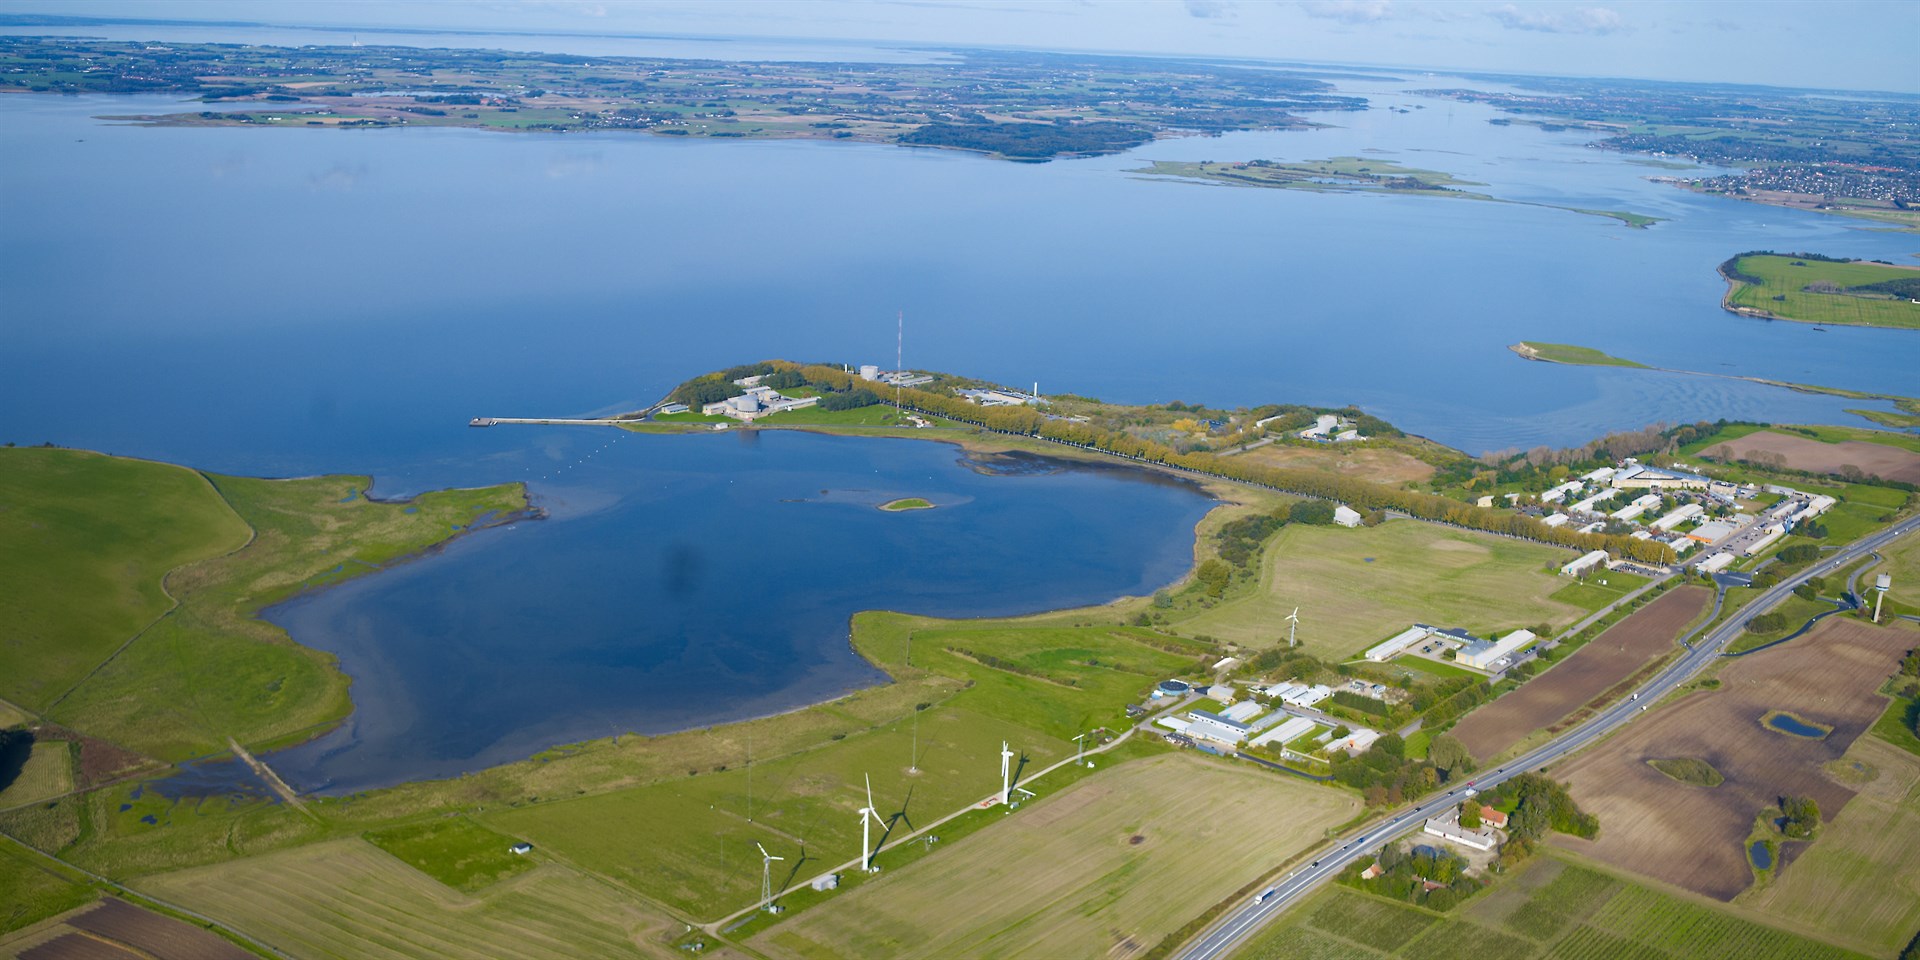 Aerial photo of Roskilde Fjord where DTU Risoe is located